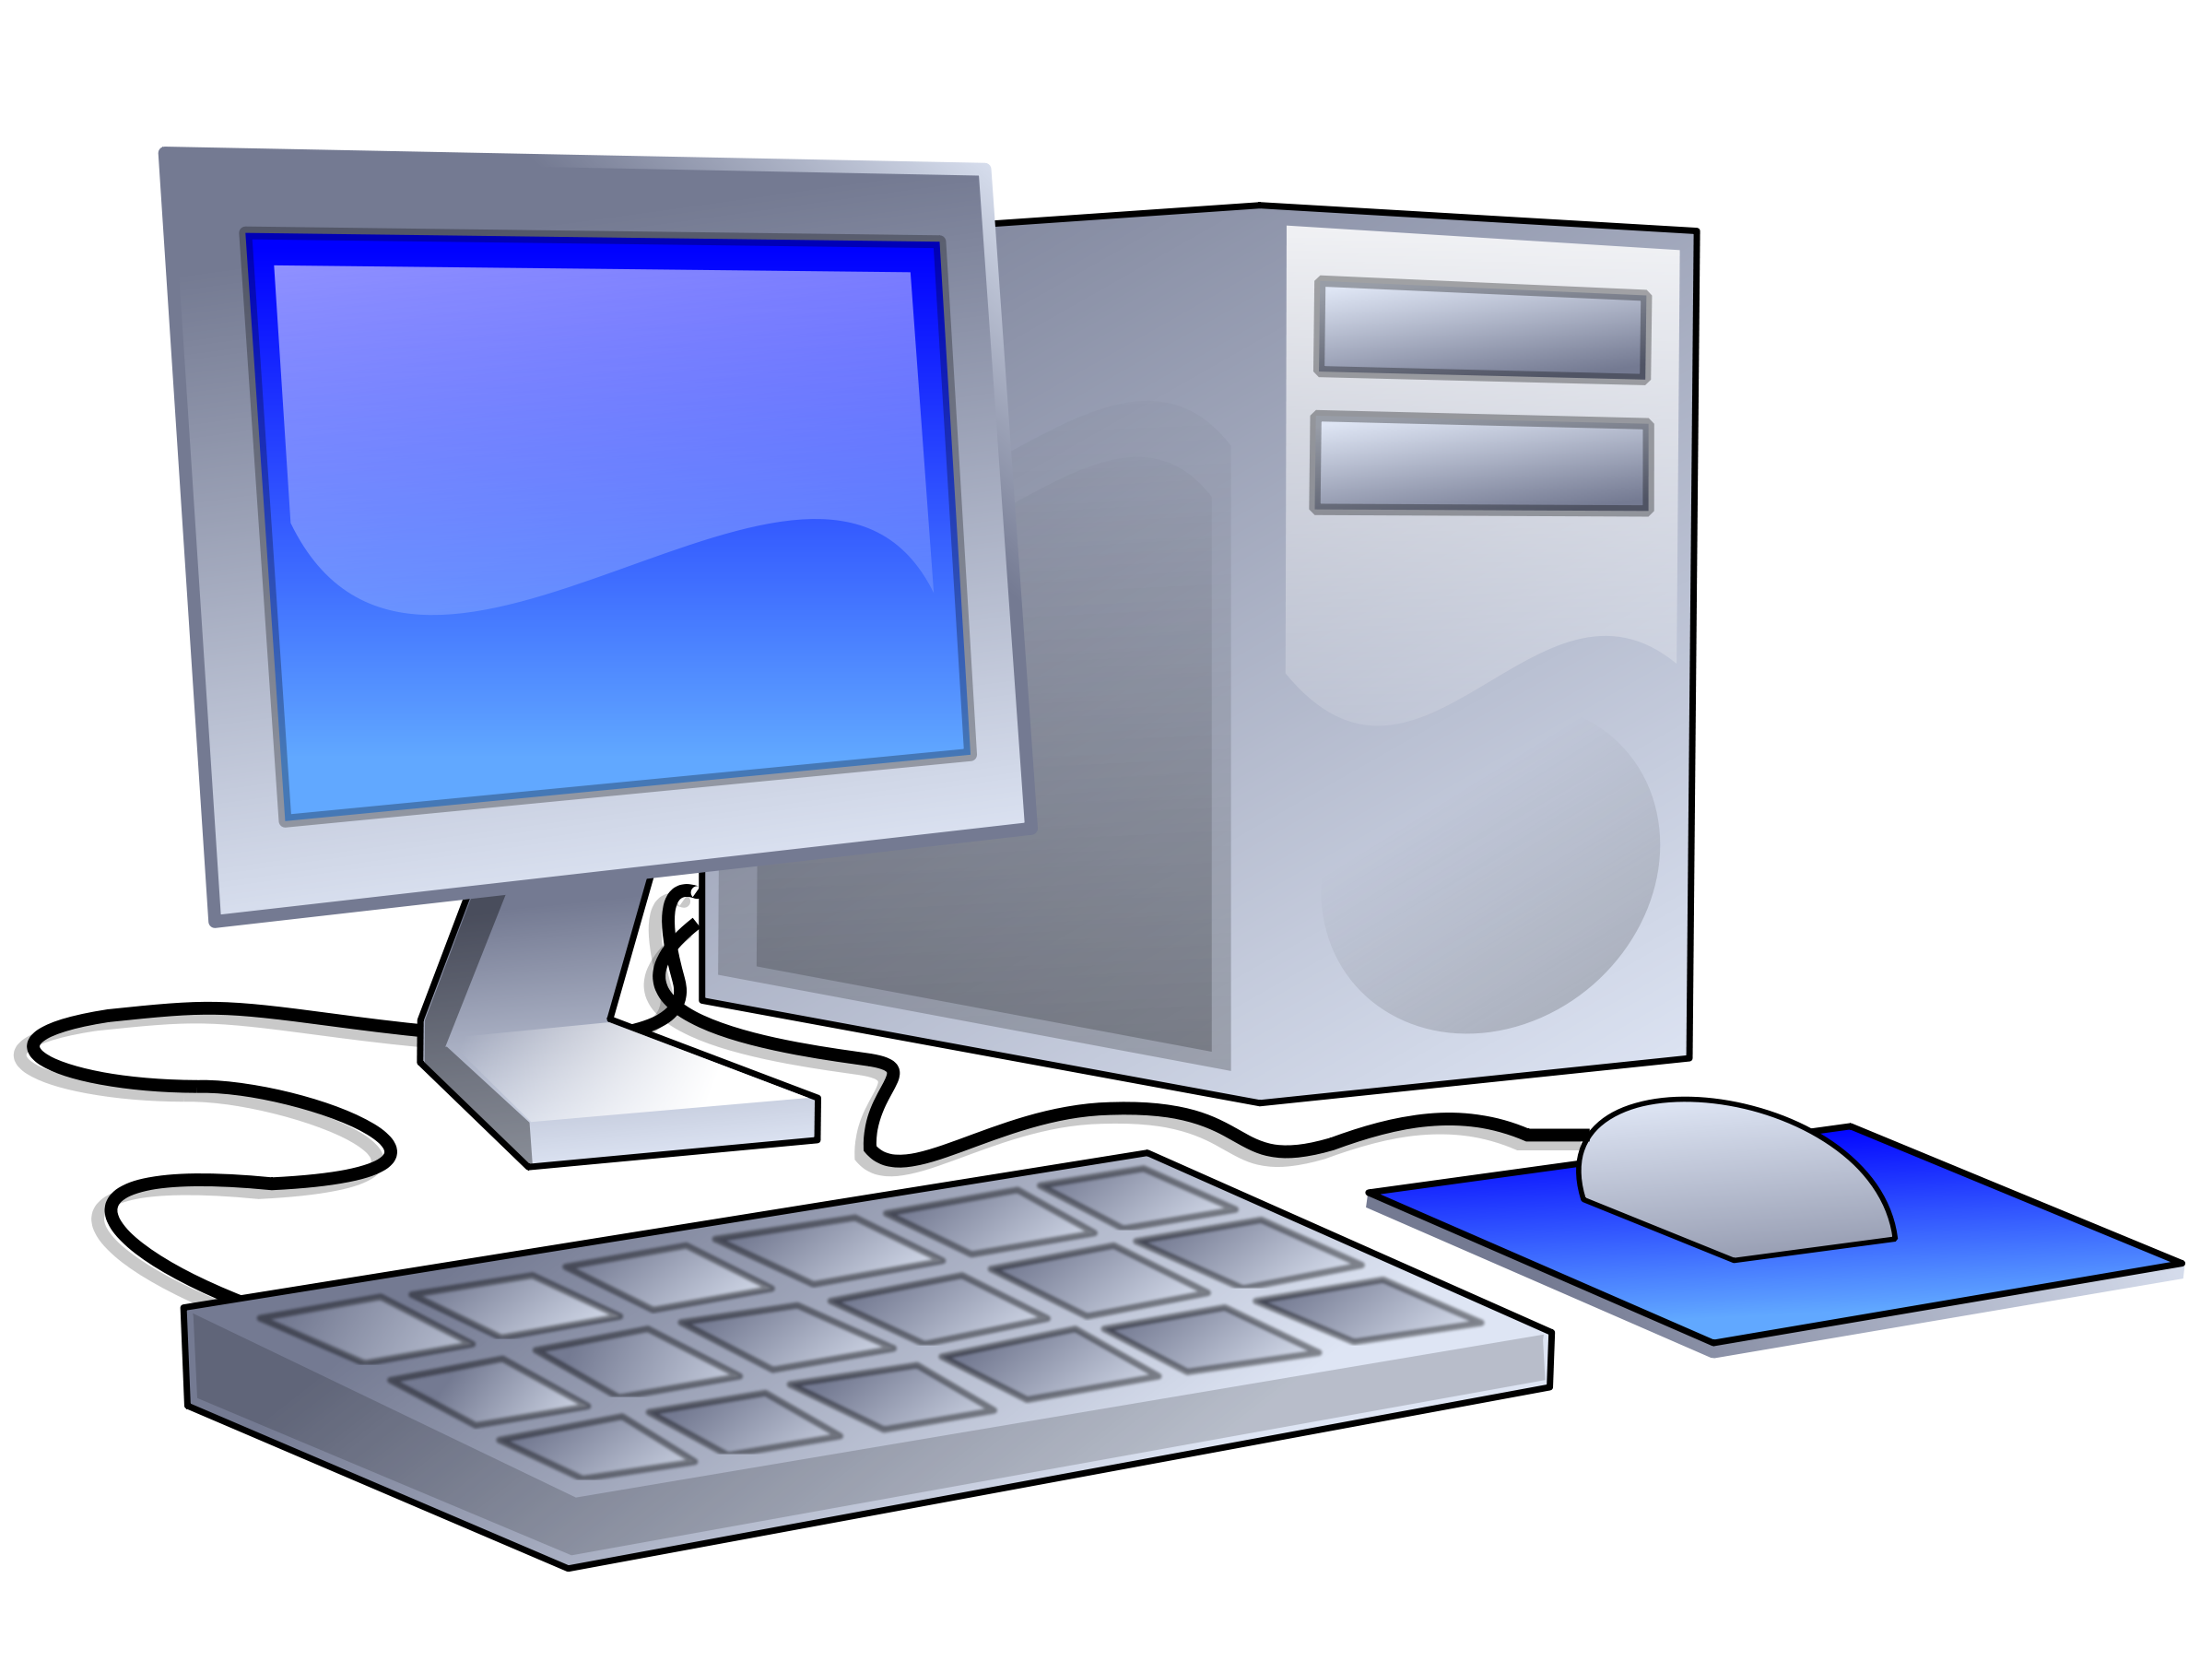 Clipart computer images